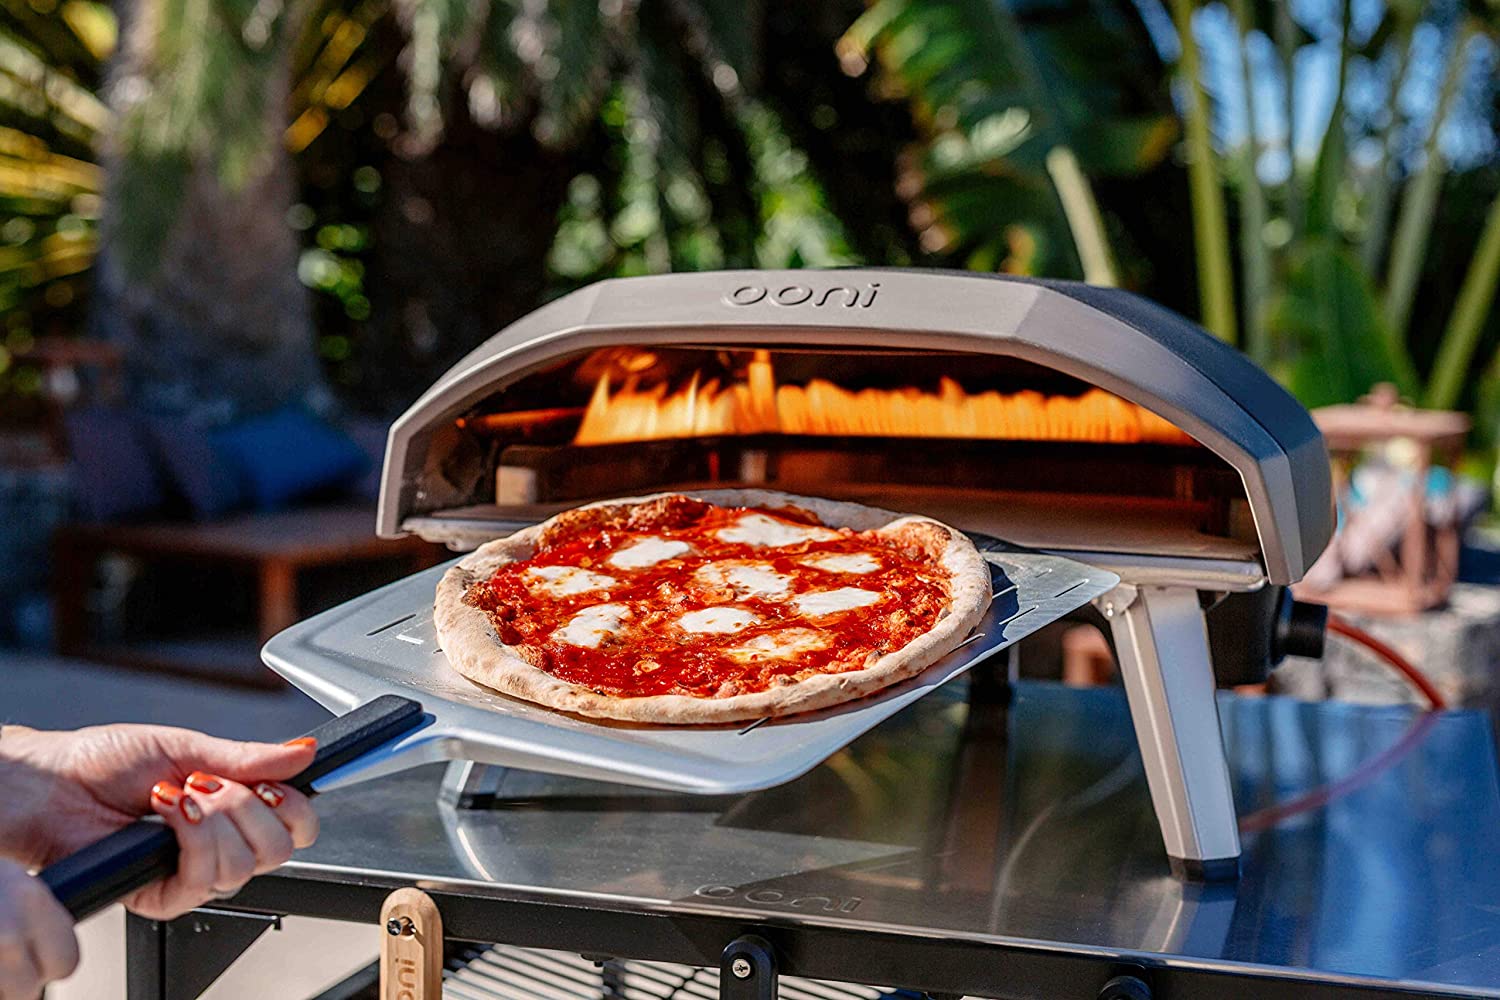 Kamado Units and Ooni Pizza Ovens Are Available at The Best Prices in BBQs 2u